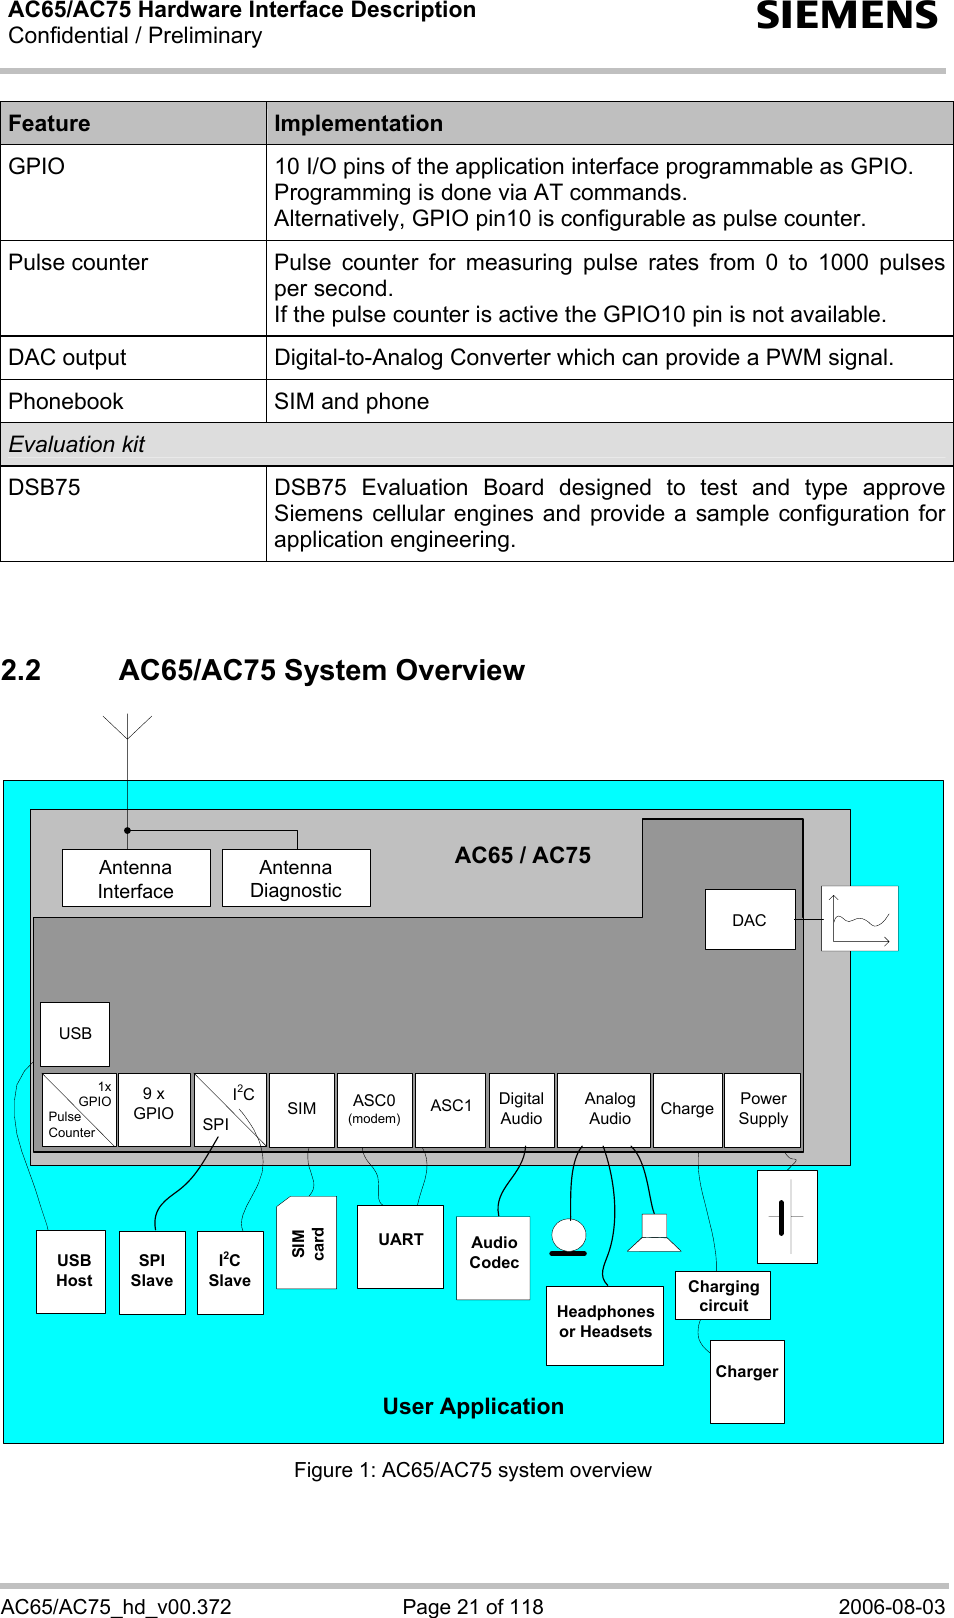 AC65/AC75 Hardware Interface Description Confidential / Preliminary  s AC65/AC75_hd_v00.372  Page 21 of 118  2006-08-03 Feature  Implementation GPIO  10 I/O pins of the application interface programmable as GPIO.  Programming is done via AT commands. Alternatively, GPIO pin10 is configurable as pulse counter. Pulse counter  Pulse counter for measuring pulse rates from 0 to 1000 pulses per second. If the pulse counter is active the GPIO10 pin is not available. DAC output  Digital-to-Analog Converter which can provide a PWM signal. Phonebook  SIM and phone Evaluation kit DSB75   DSB75 Evaluation Board designed to test and type approve Siemens cellular engines and provide a sample configuration for application engineering.   2.2  AC65/AC75 System Overview User ApplicationAC65 / AC75Application InterfaceChargerCharging circuitUARTAntennaInterfaceSPIUSBDACUSB HostASC0(modem) ASC1 SIM Digital Audio Charge PowerSupplyI2C Slave9 x GPIO Analog Audio1xGPIOPulse CounterAntennaDiagnosticI2CHeadphones or HeadsetsSIM cardSPI SlaveAudio Codec Figure 1: AC65/AC75 system overview  